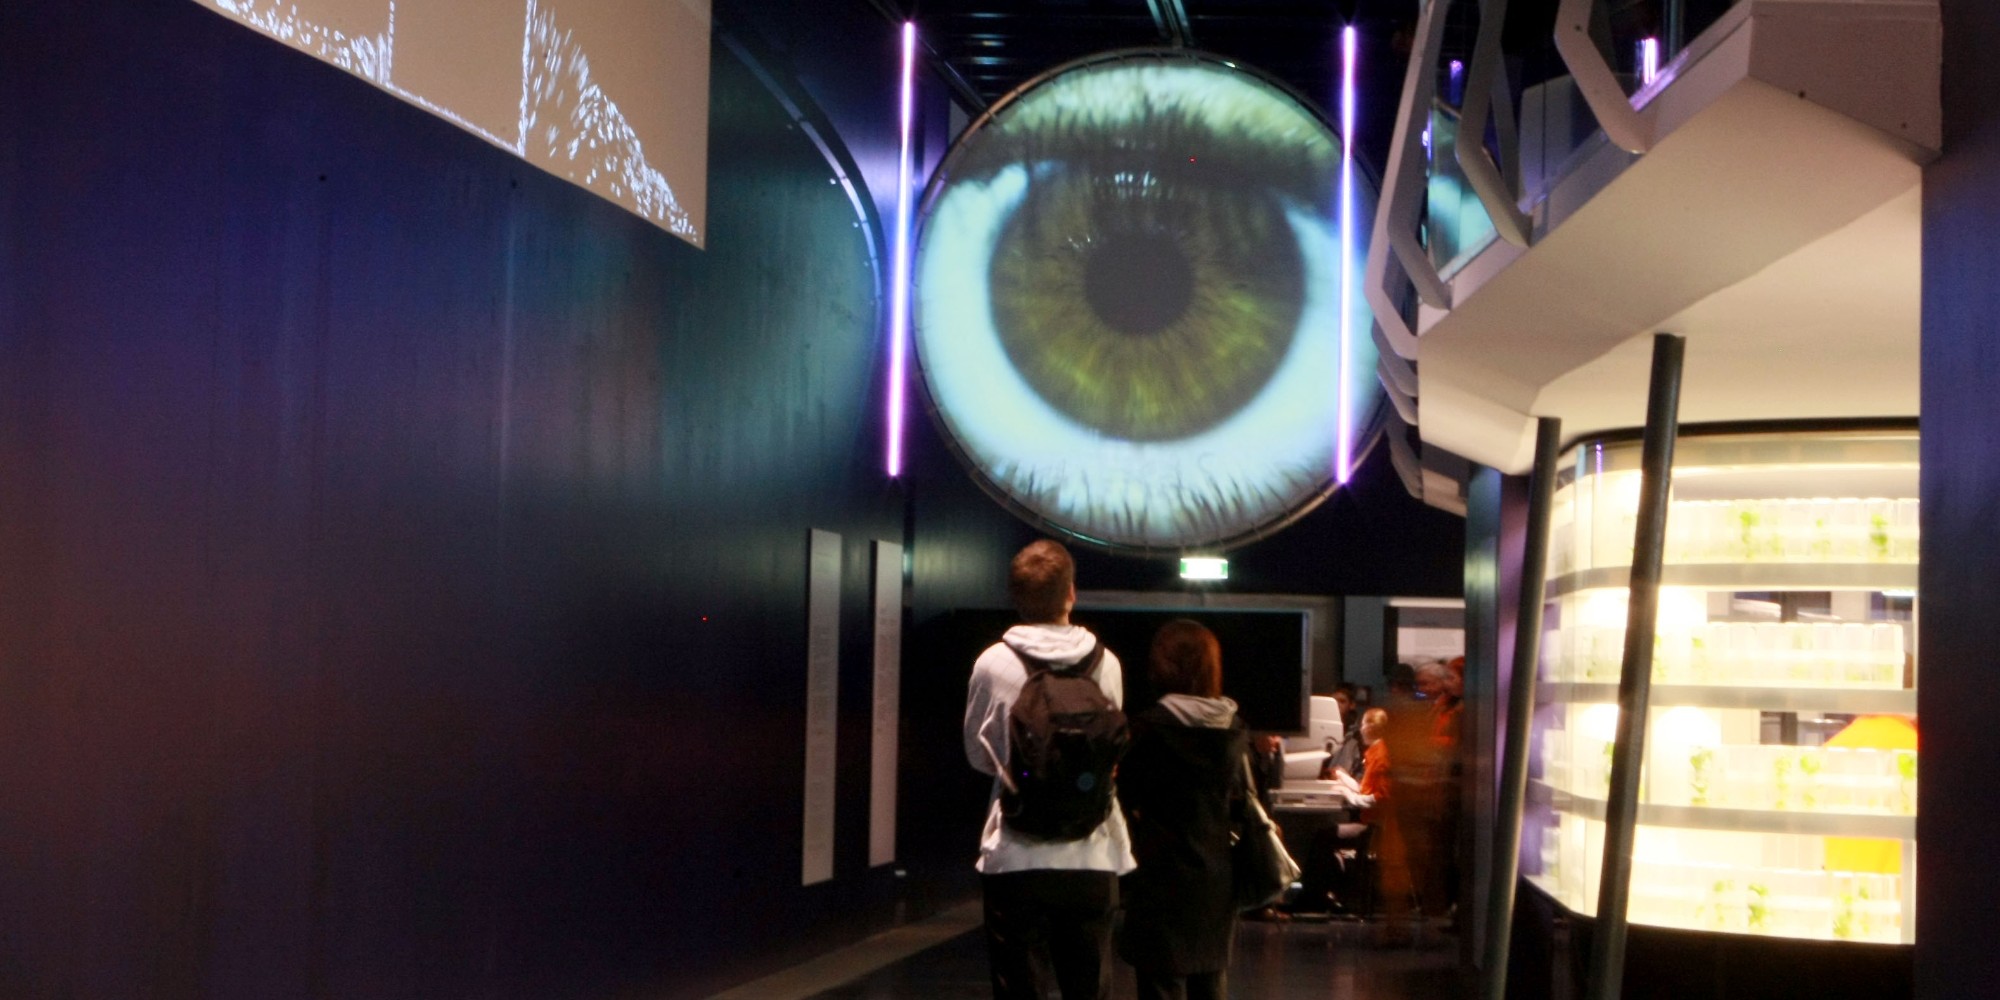 BrainLab at the Ars Electronica Center